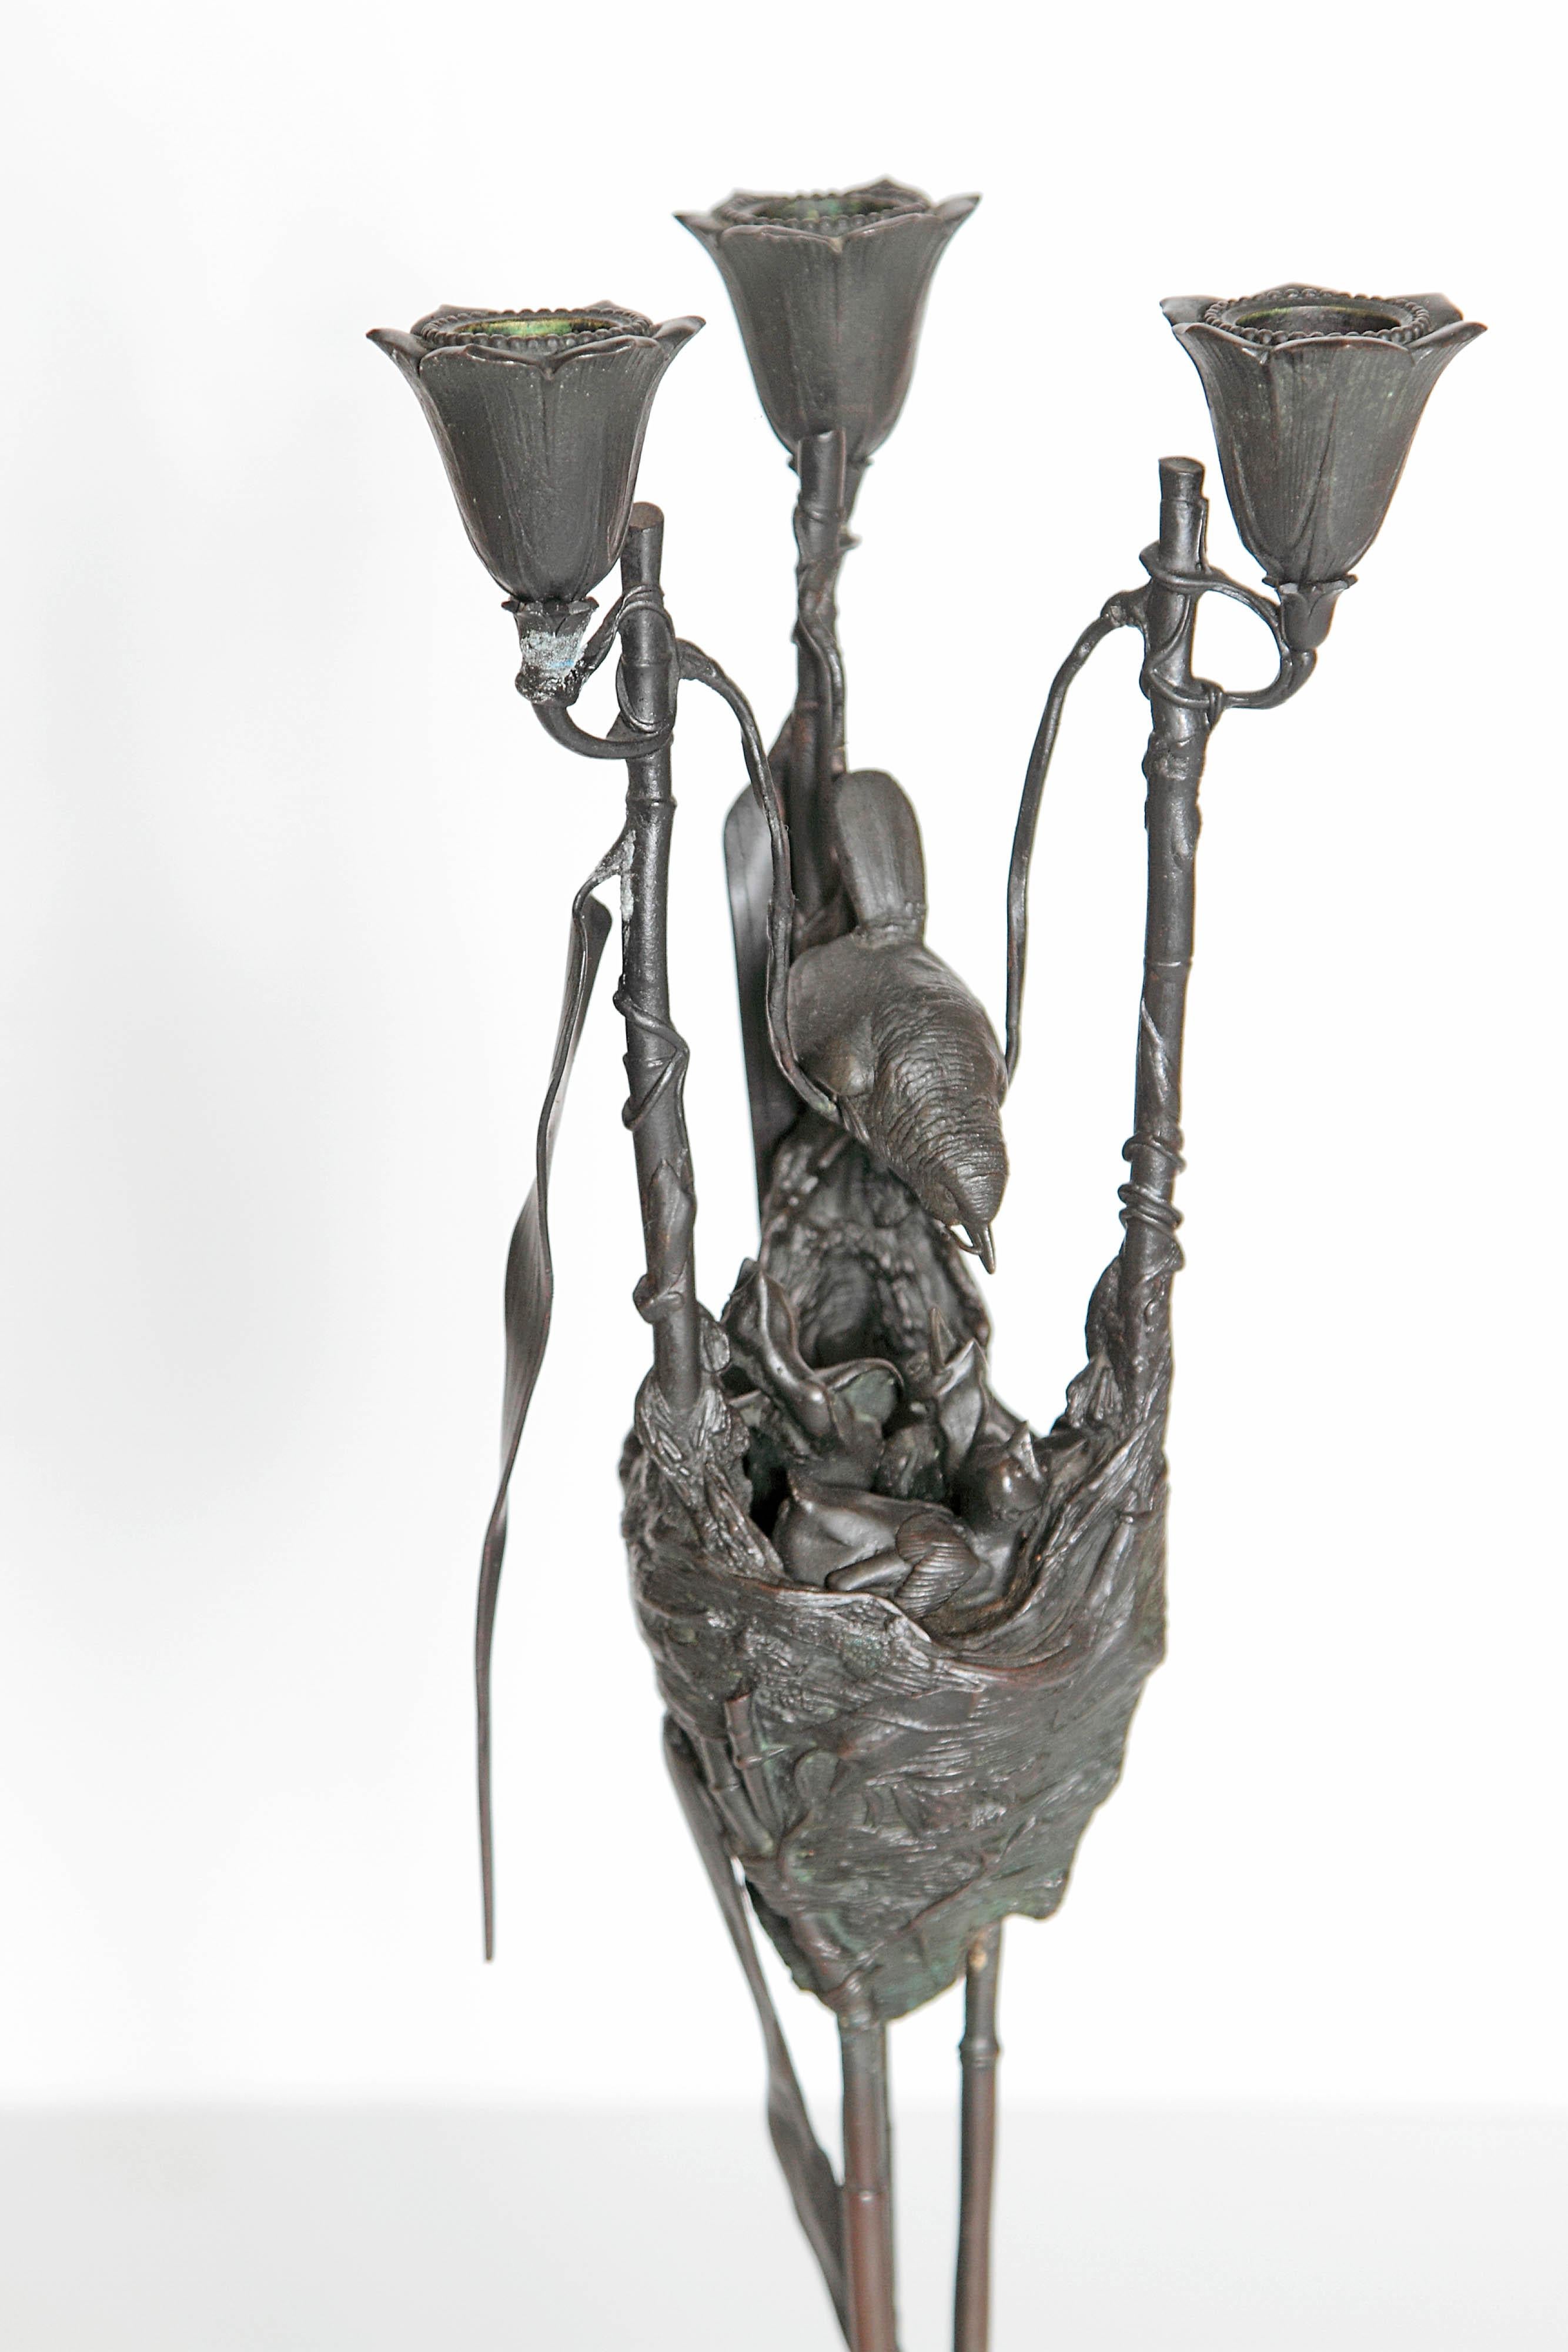 A pair of Art Nouveau bronze candelabra by Auguste-Nicolas Cain, (French 1821-1894). The bronze pieces artfully portray animals. The tripod base is formed from snails with their tiny antennae. One candelabra is a mother bird feeding her babies. On